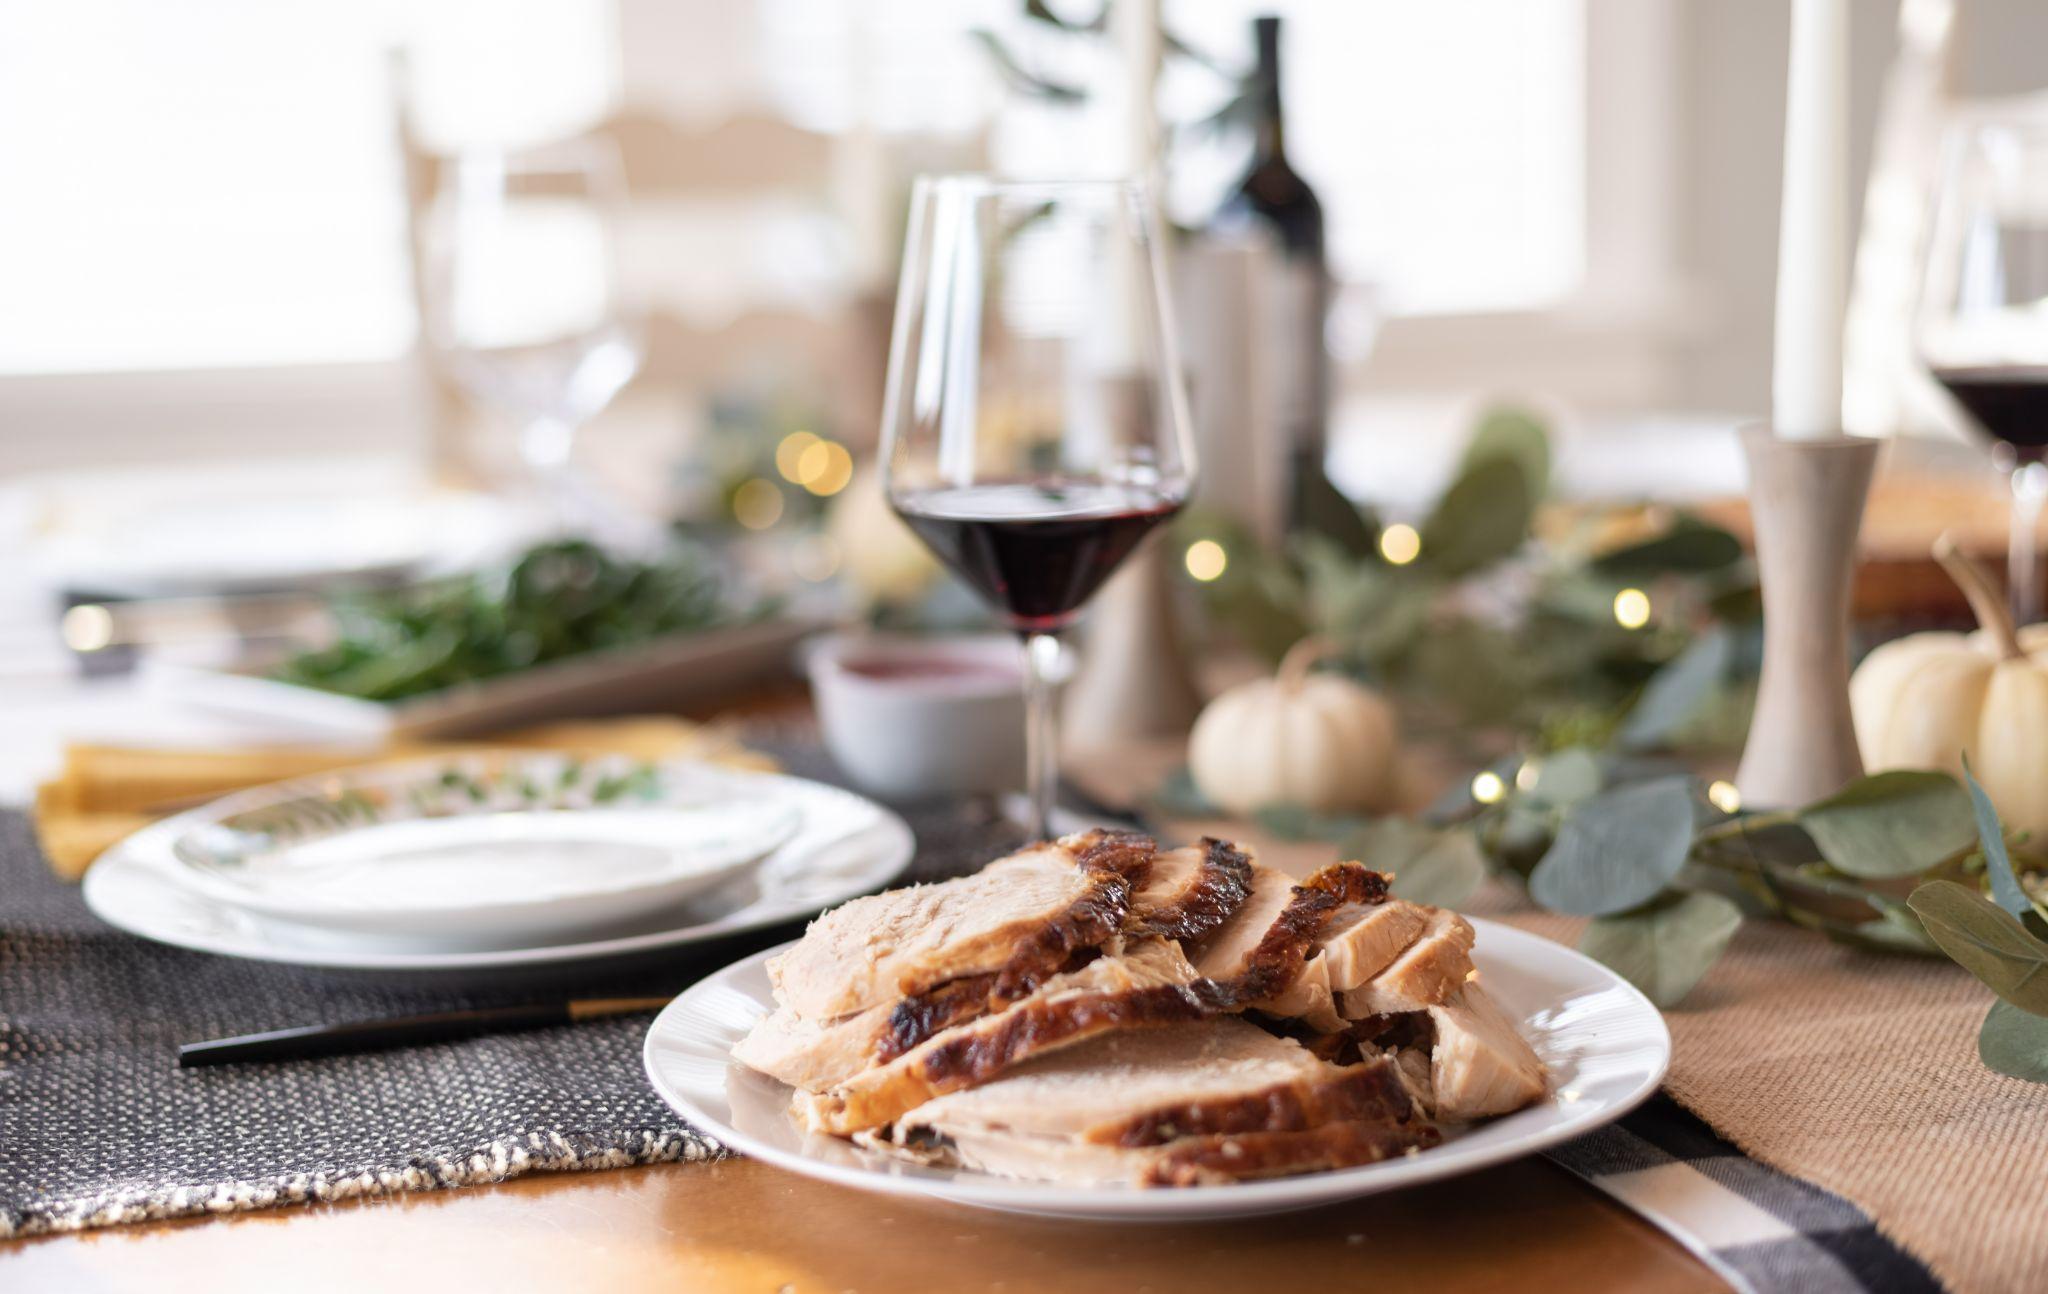 Plate of sliced turkey with red wine in blurred background